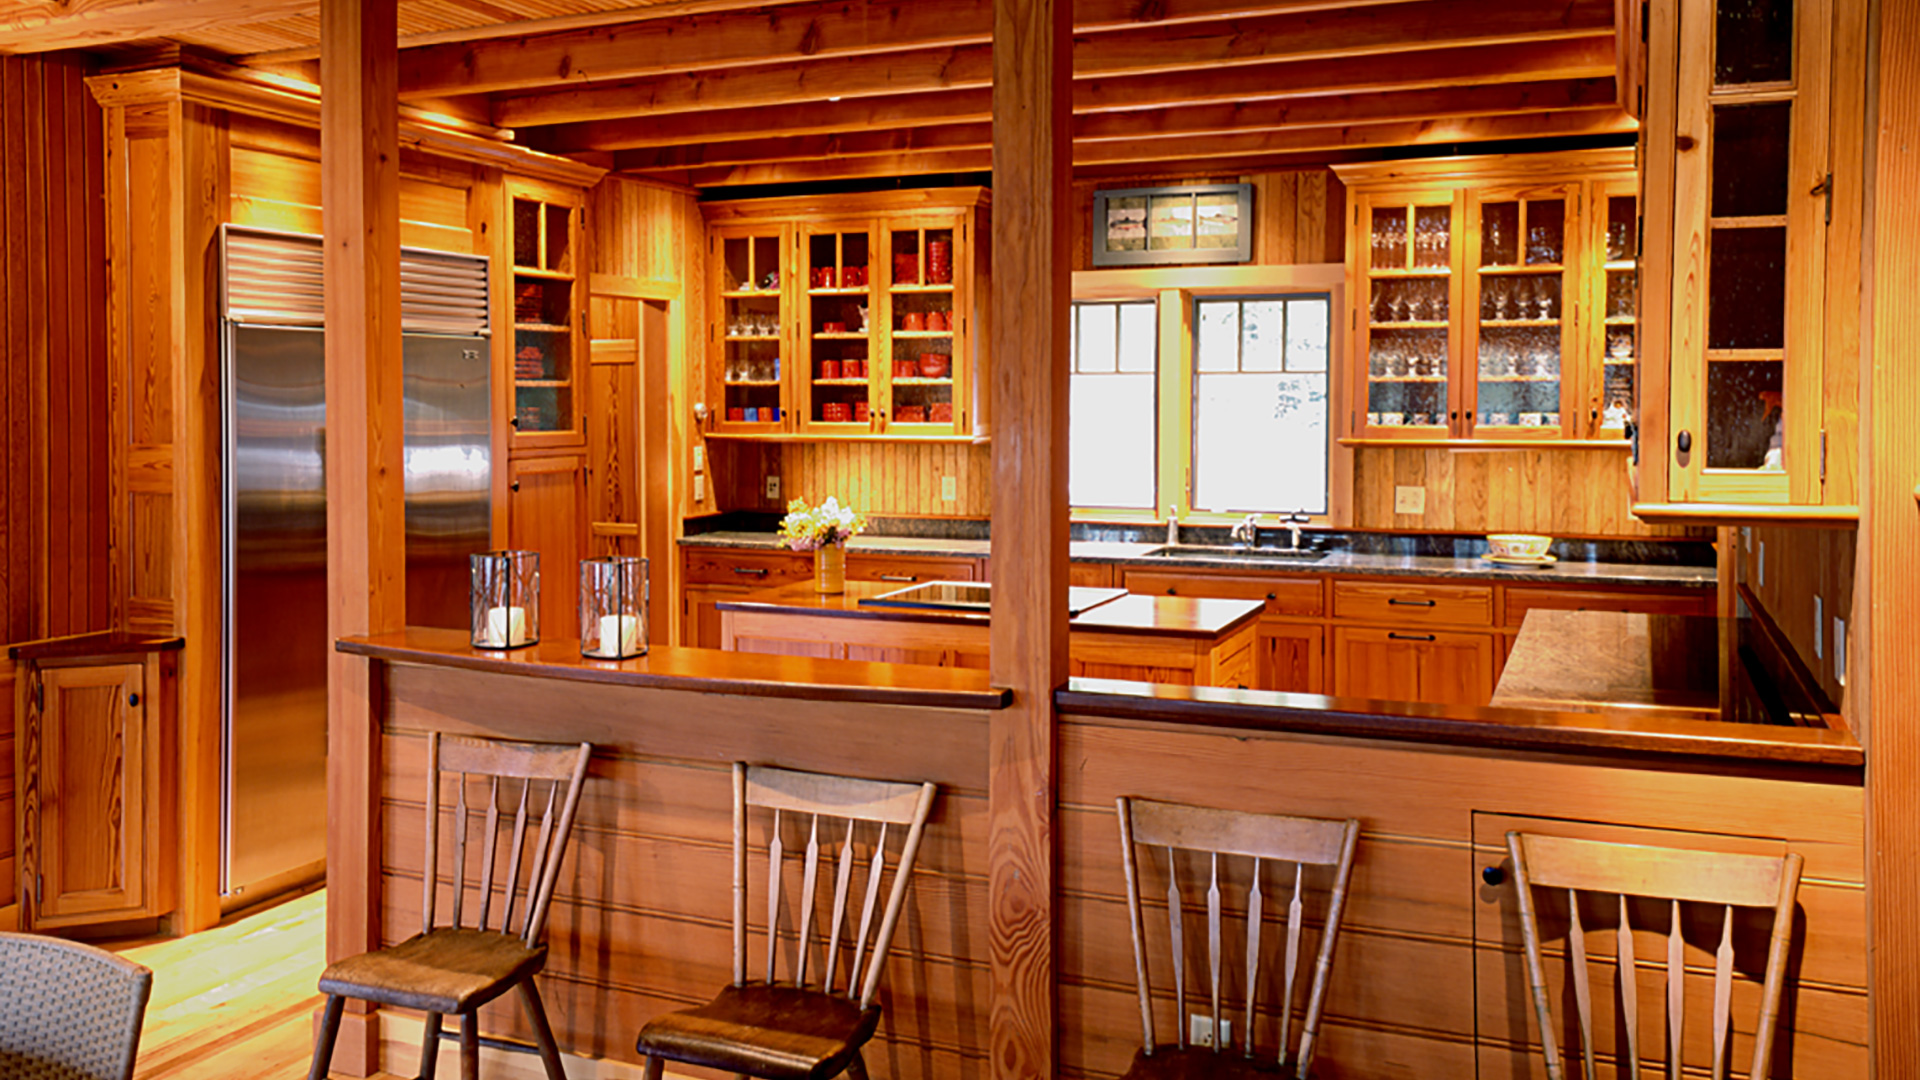 Silver Lake, New Hampshire rustic kitchen with heart pine cabinets